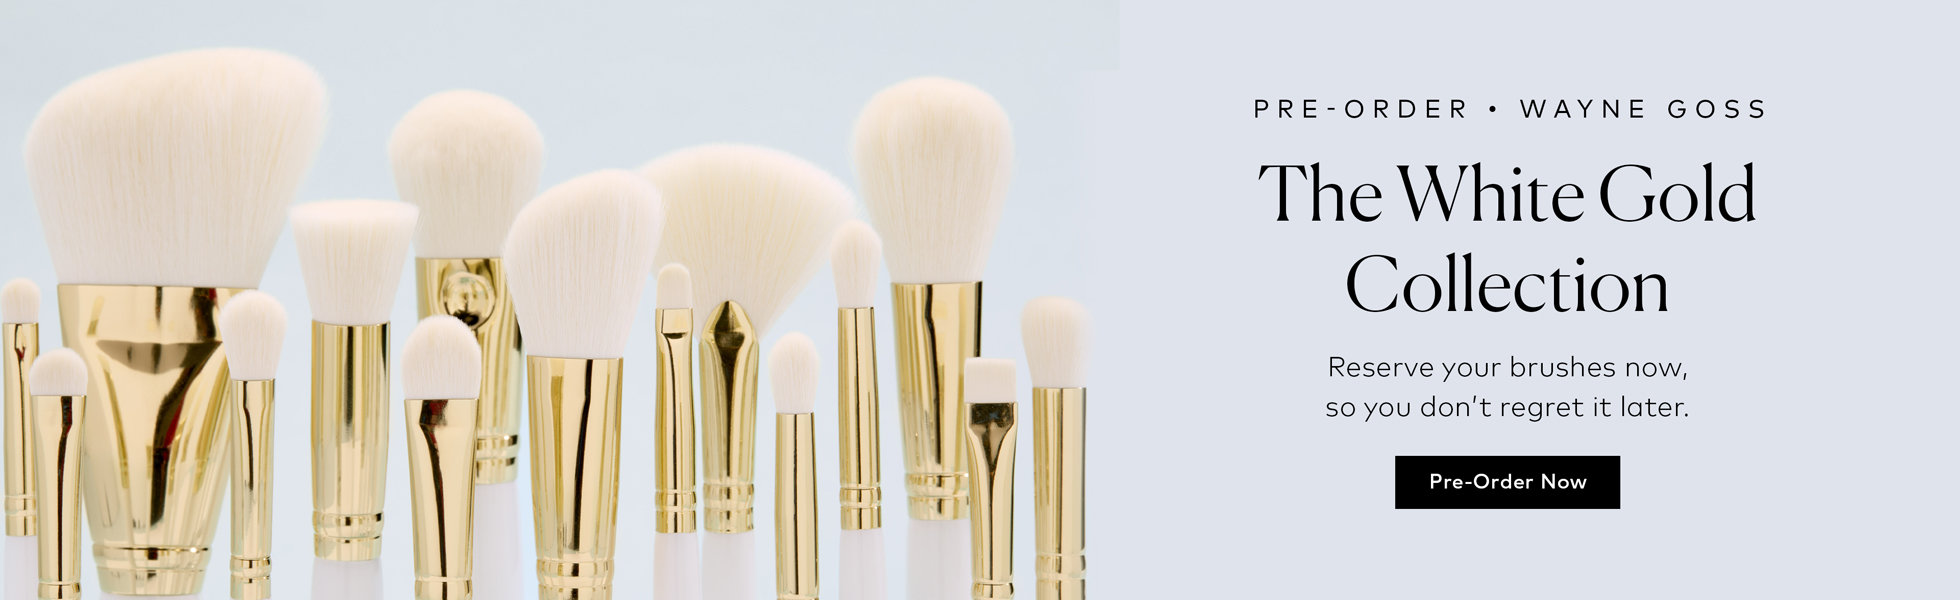 Reserve your Wayne Goss The White Gold Collection brushes now, so you don't regret it later.